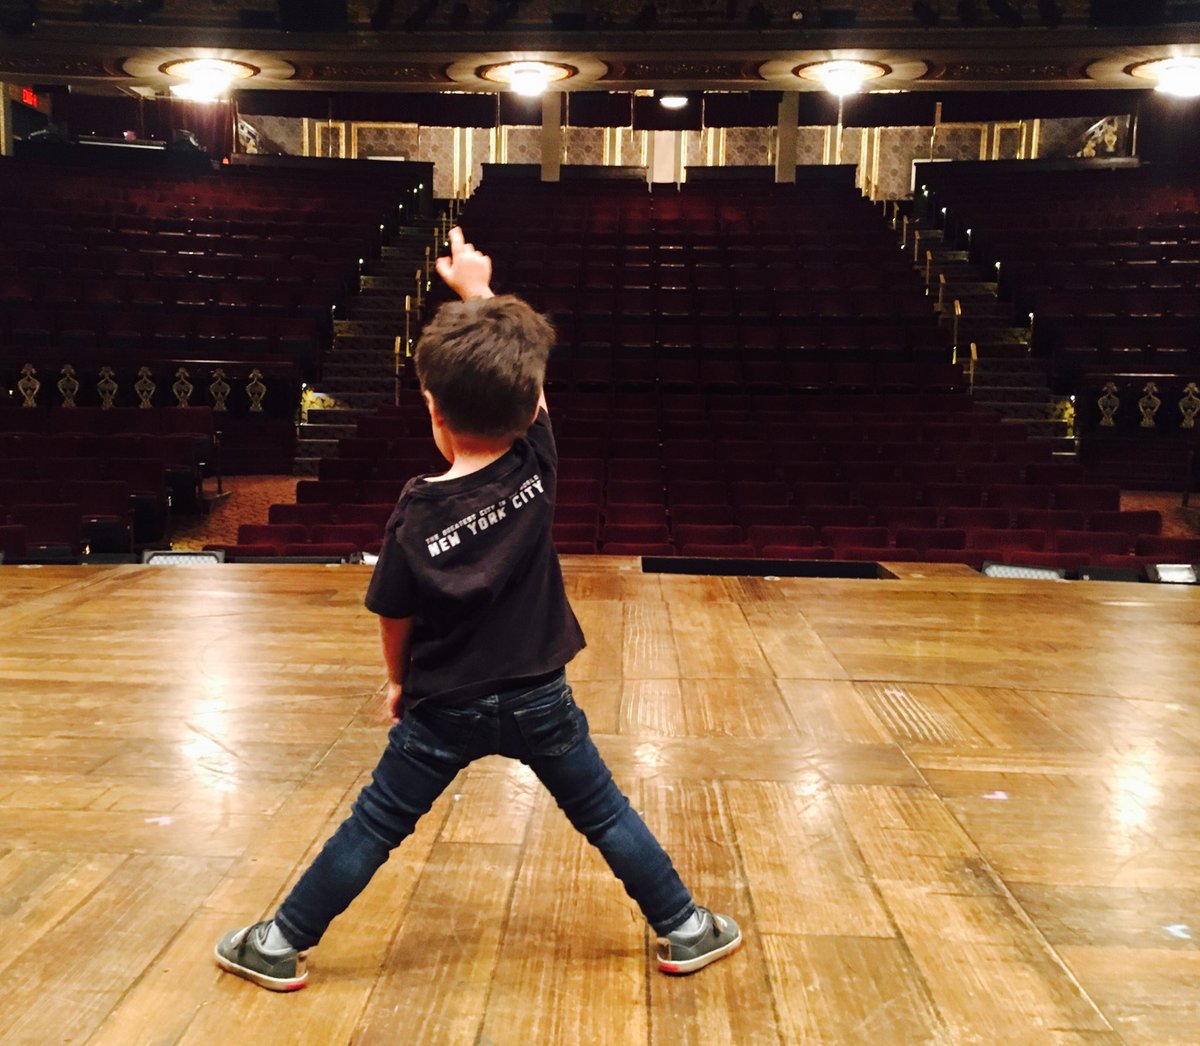 In advance of his 3rd birthday, we took lil man to Act One of Hamilton on Saturday. His comments in this thread...